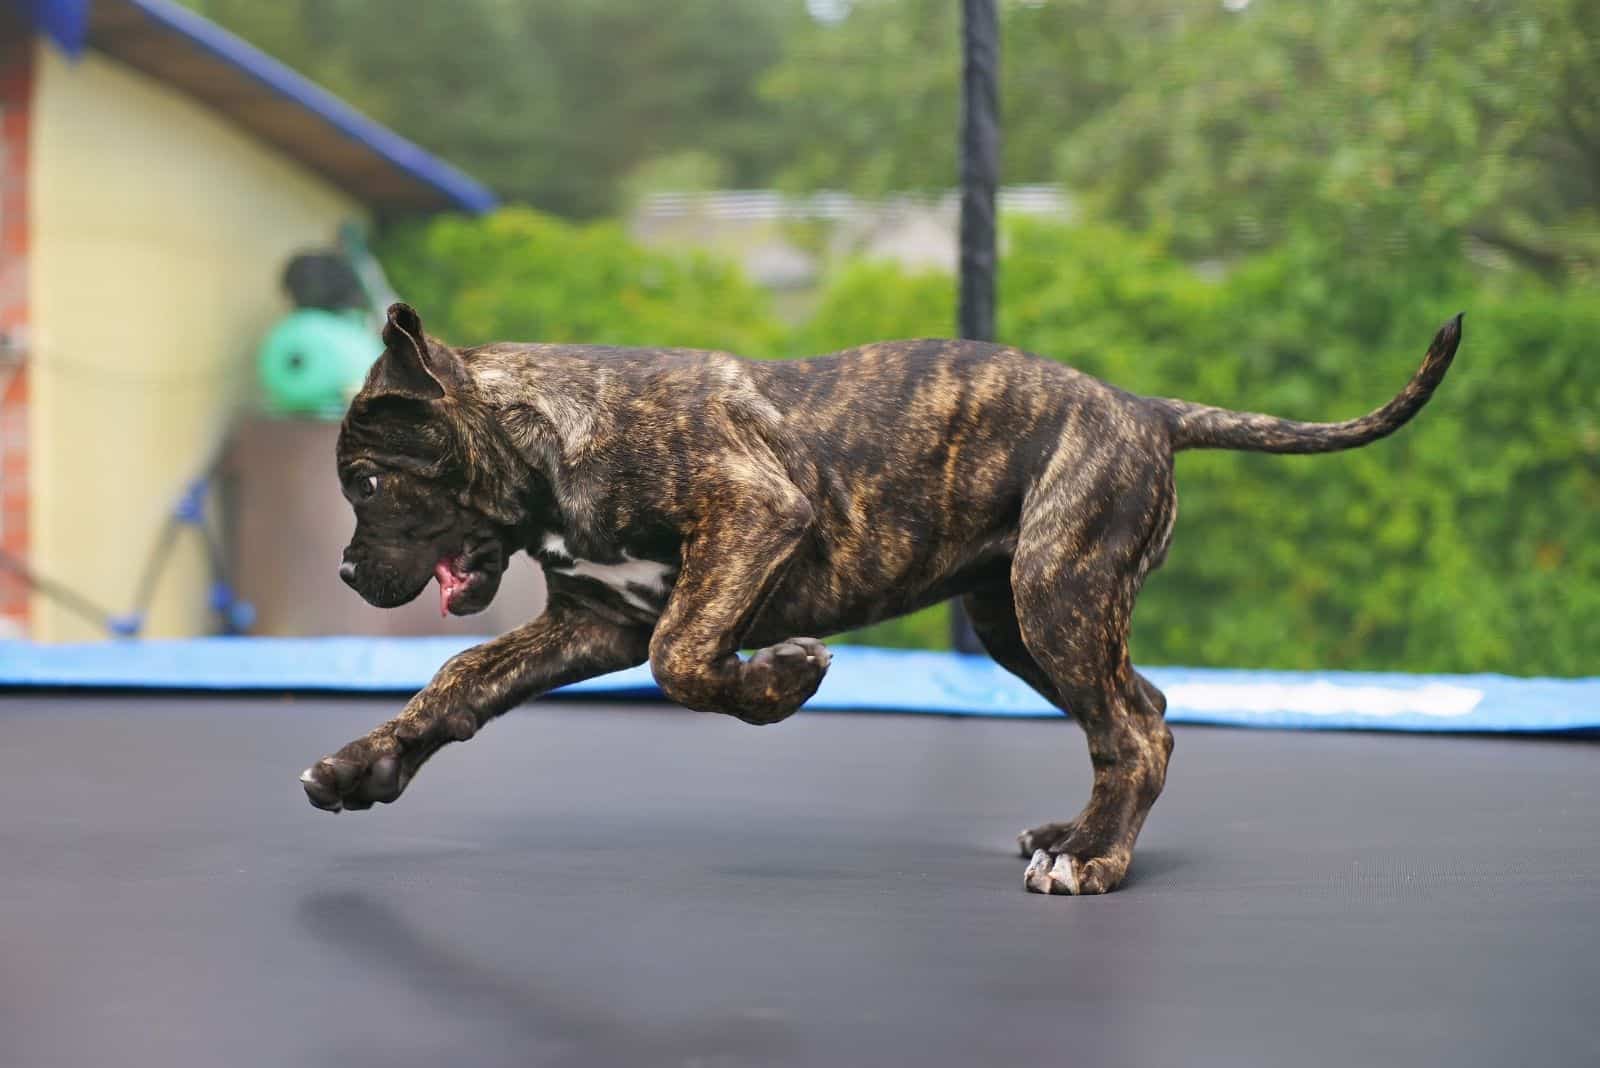 brindle cane corso puppy jumping outdoors in the trampoline